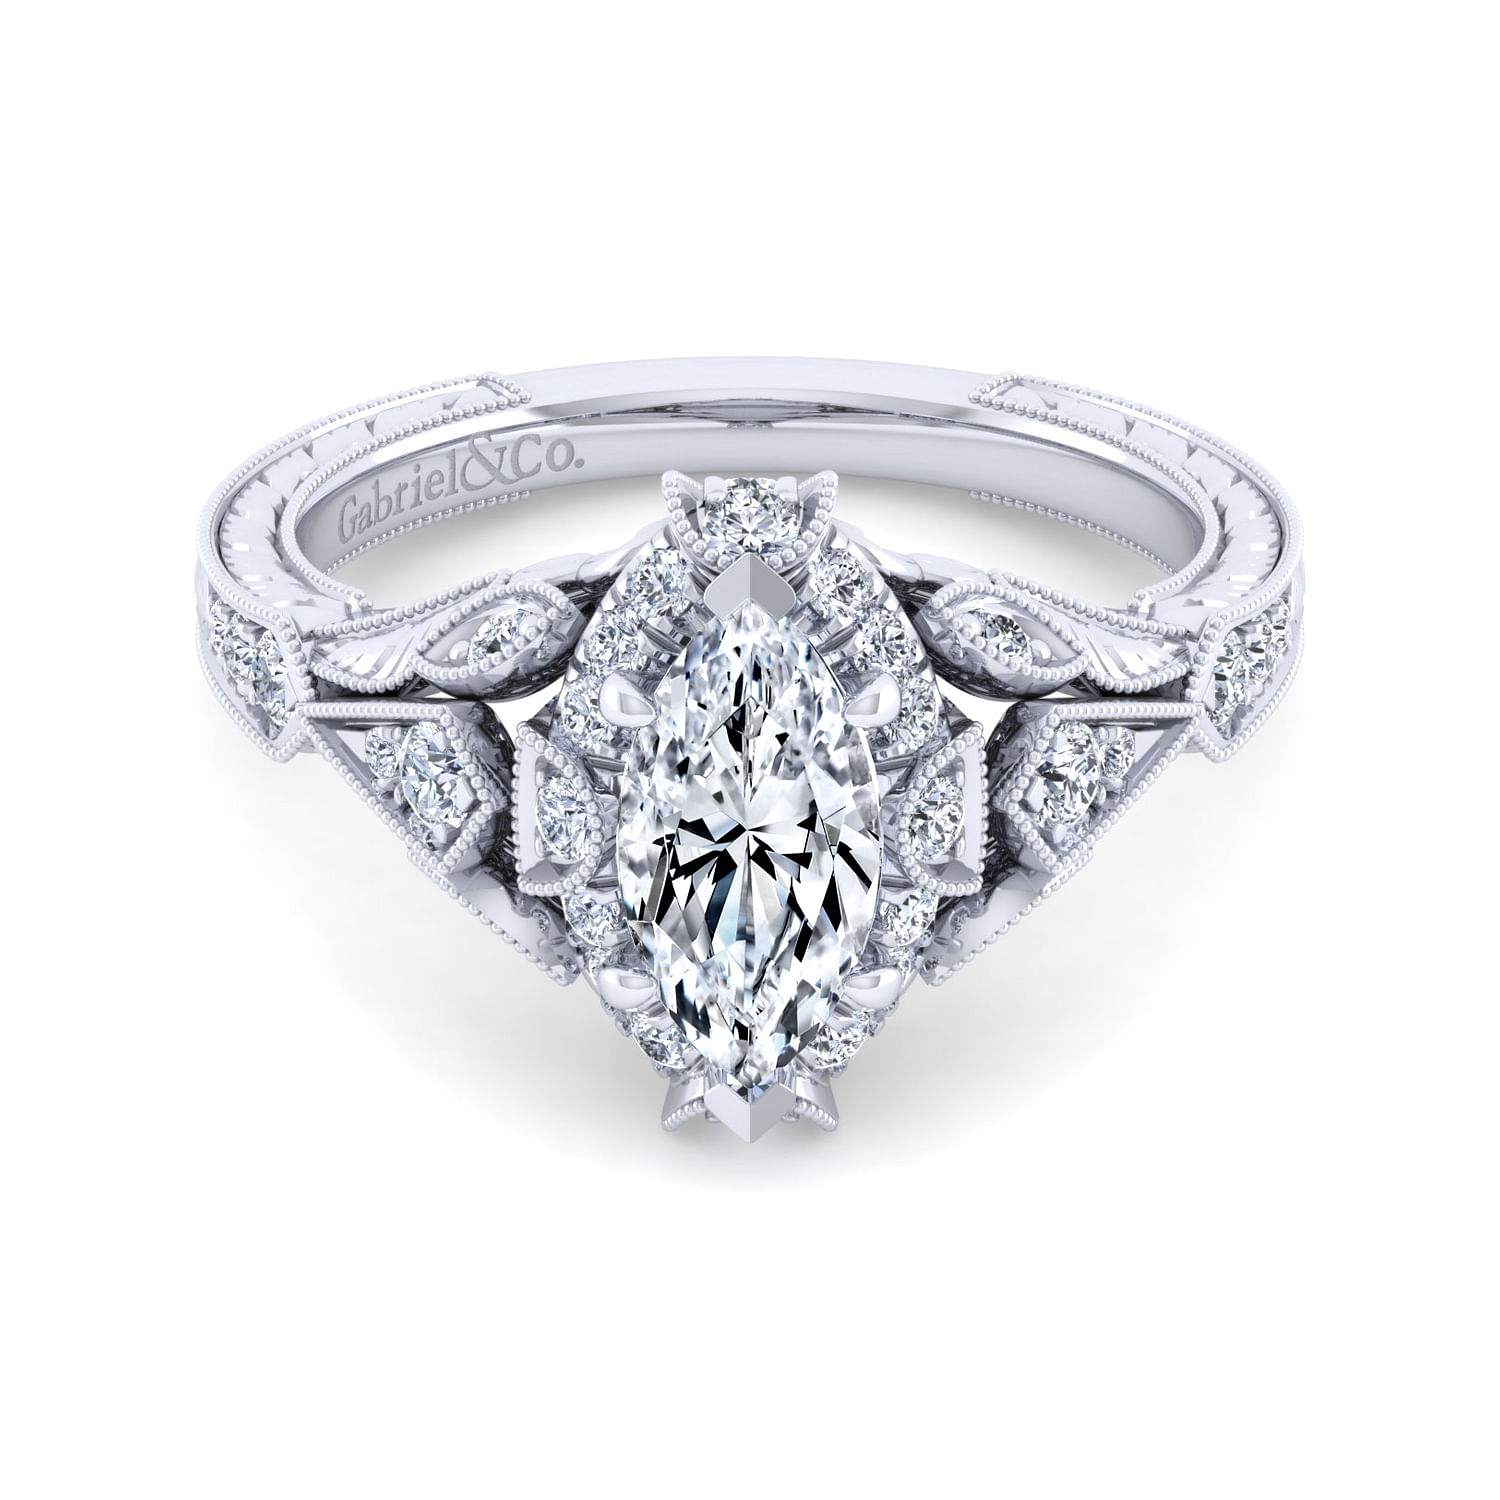 Annadale - Unique 14K White Gold Vintage Inspired Marquise Shape Diamond Halo Engagement Ring